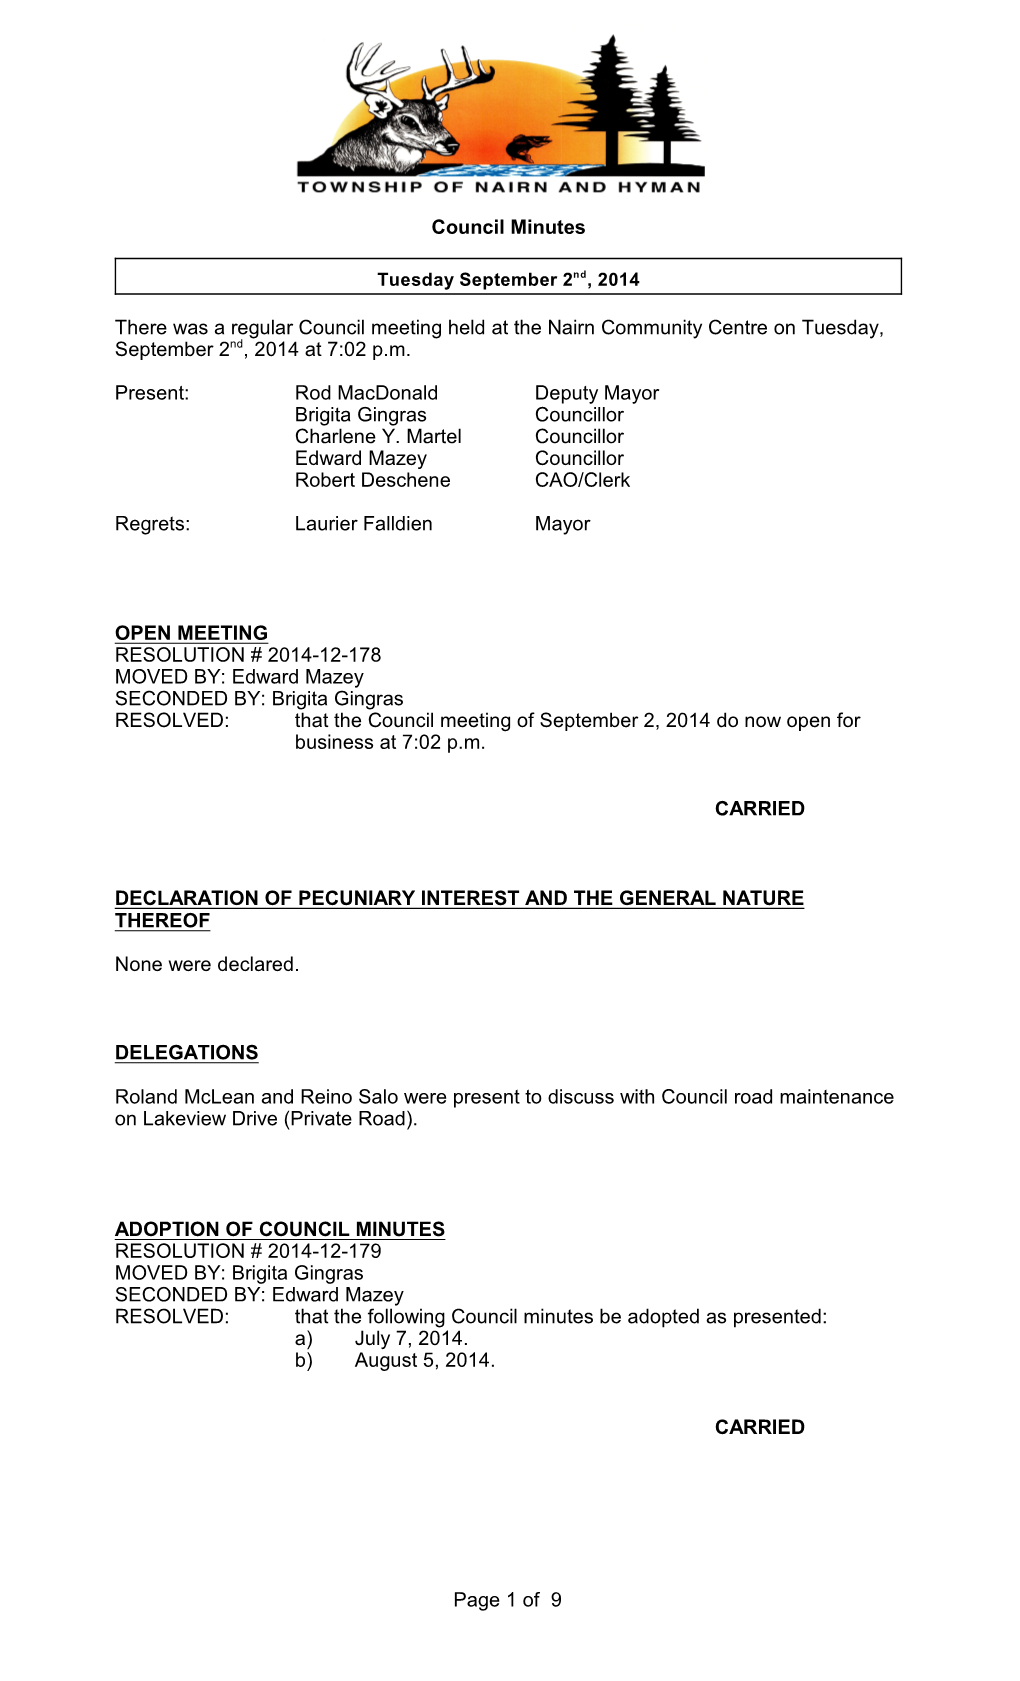 Council Minutes – September 2, 2014